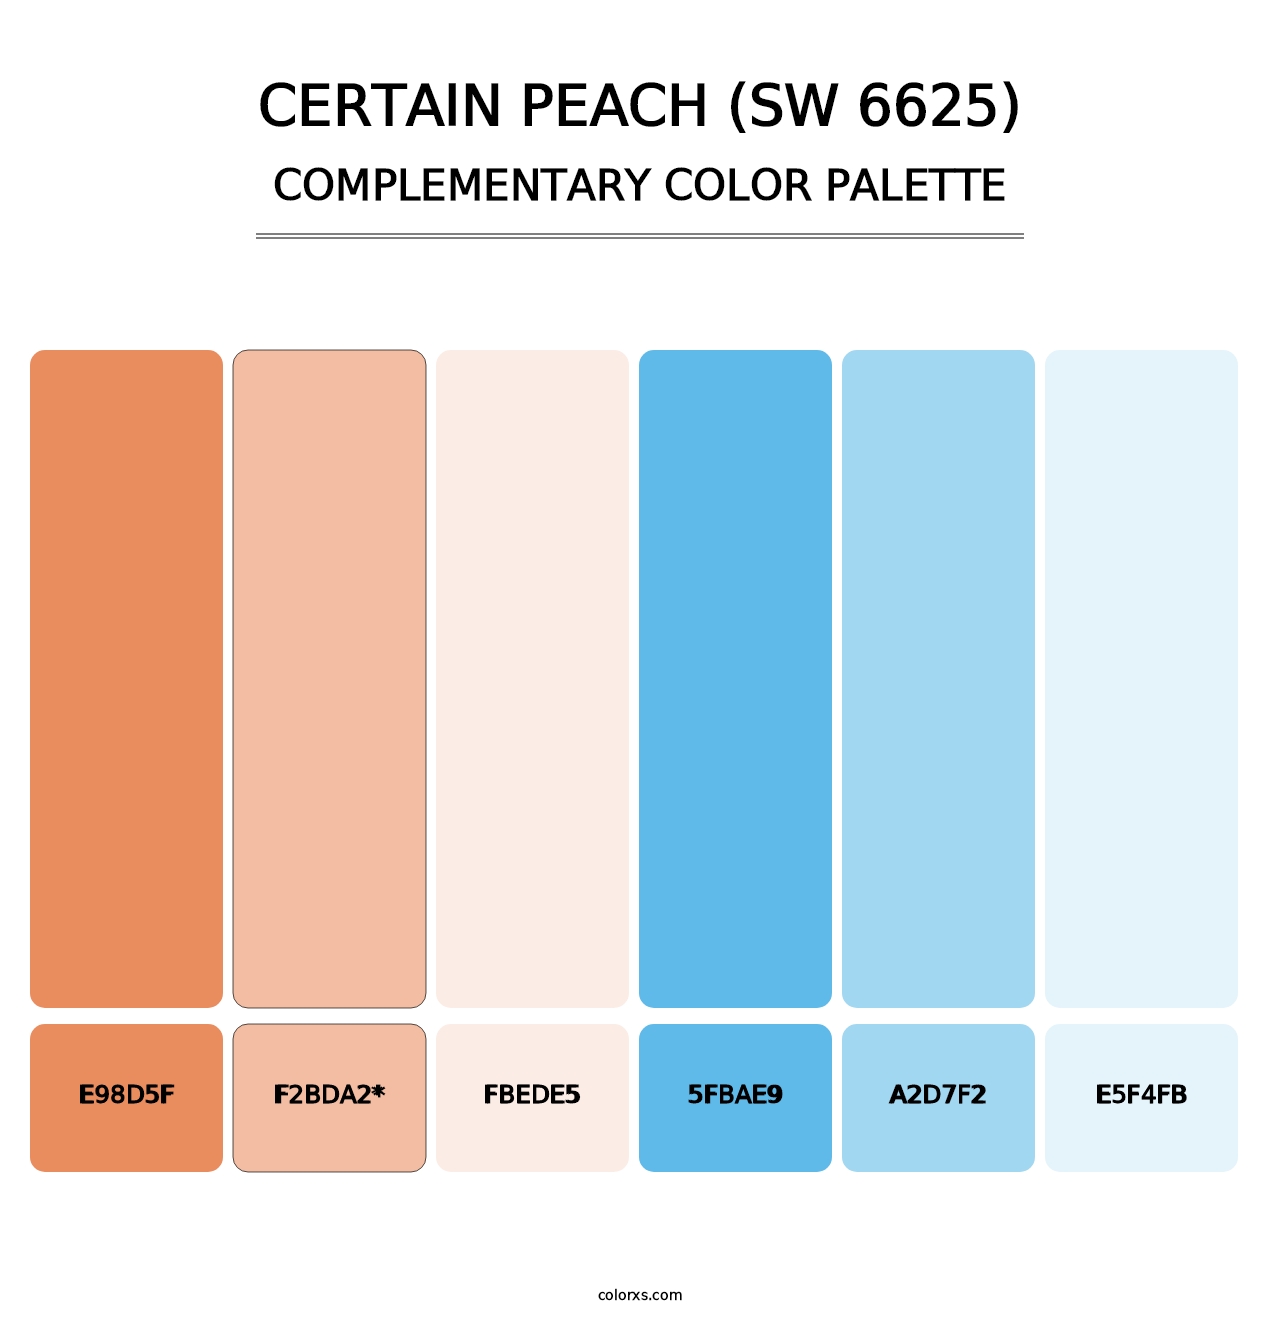 Certain Peach (SW 6625) - Complementary Color Palette